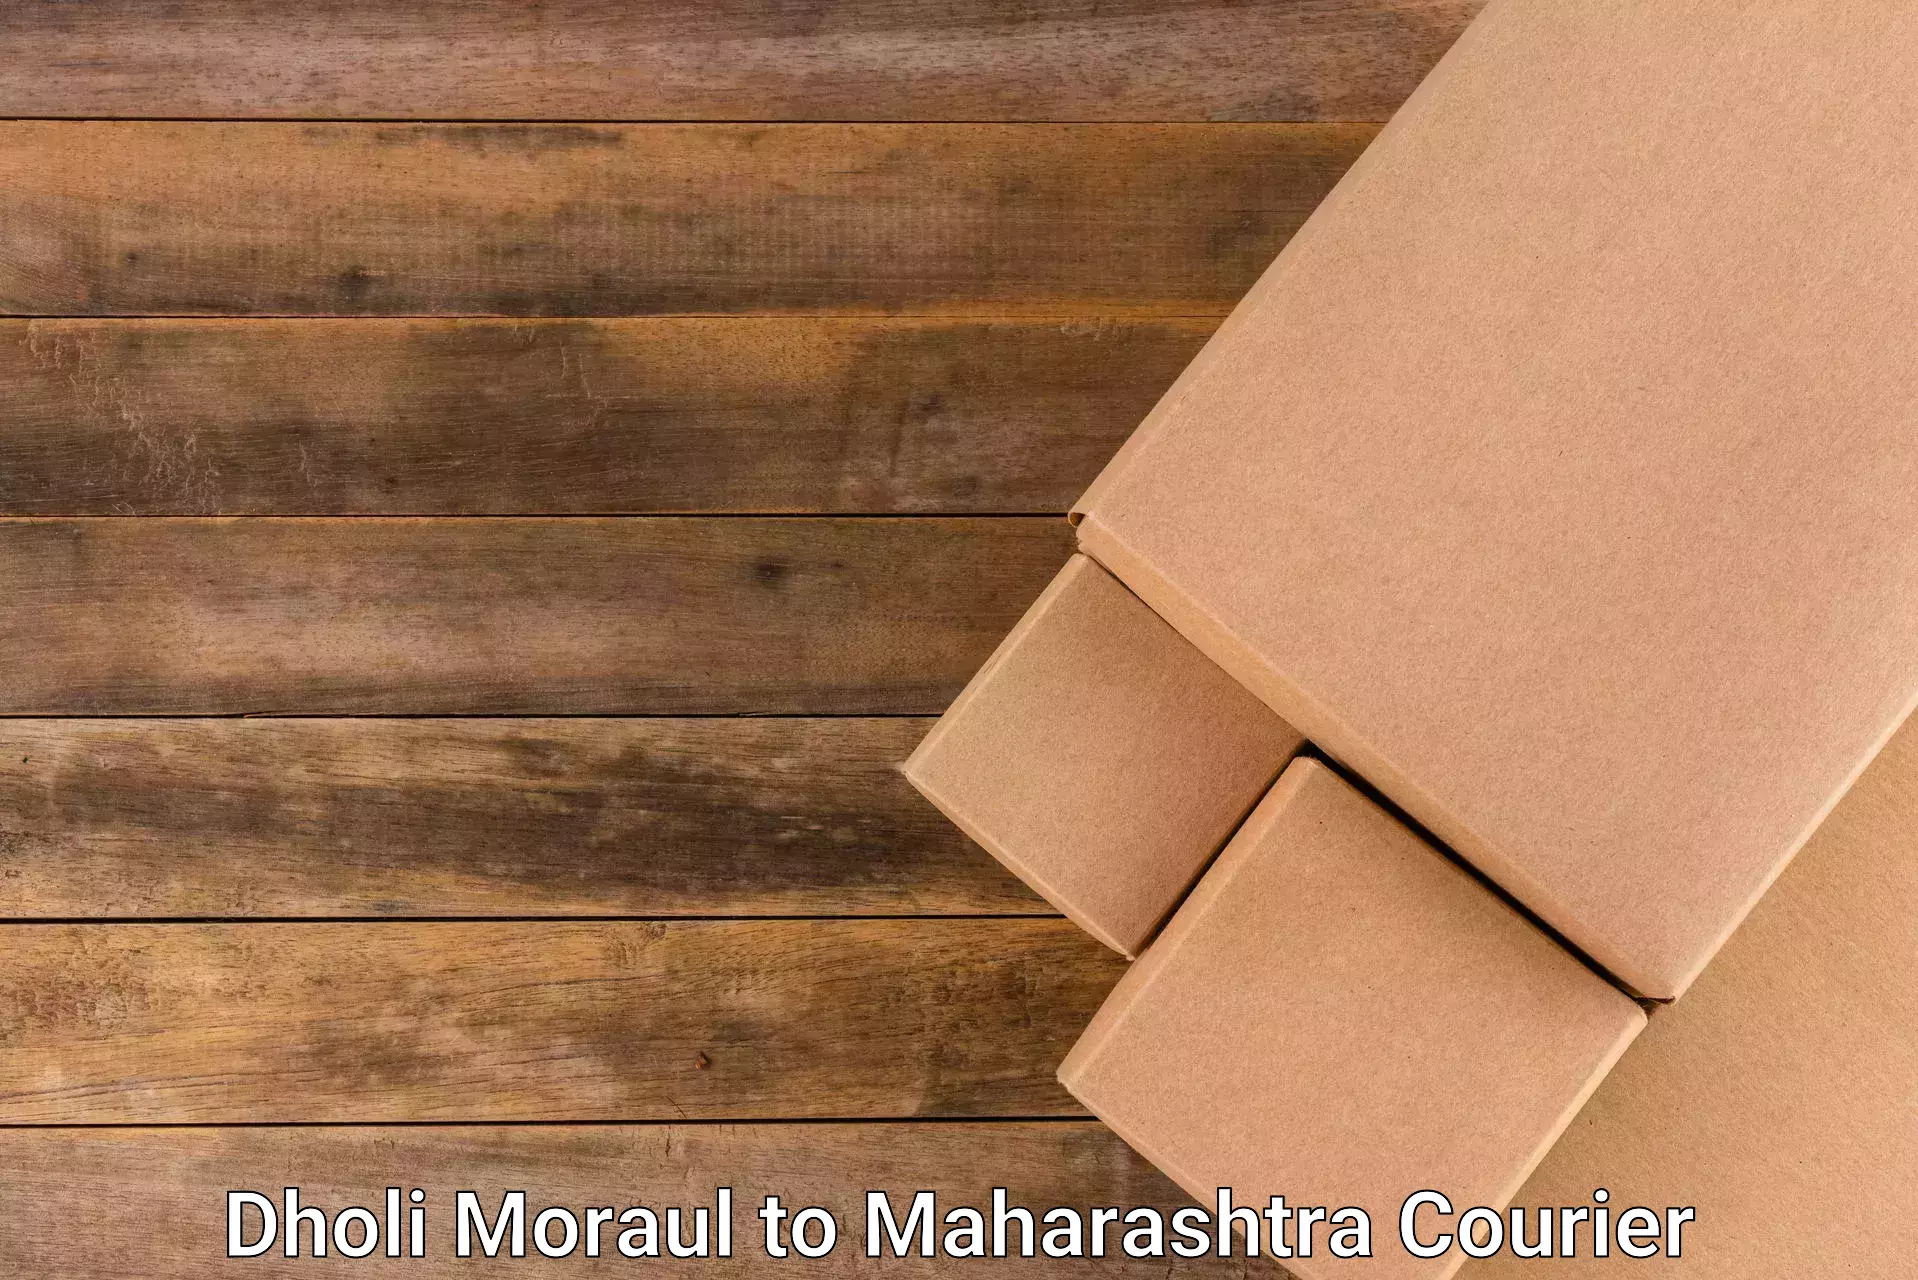 Reliable courier service in Dholi Moraul to Soegaon